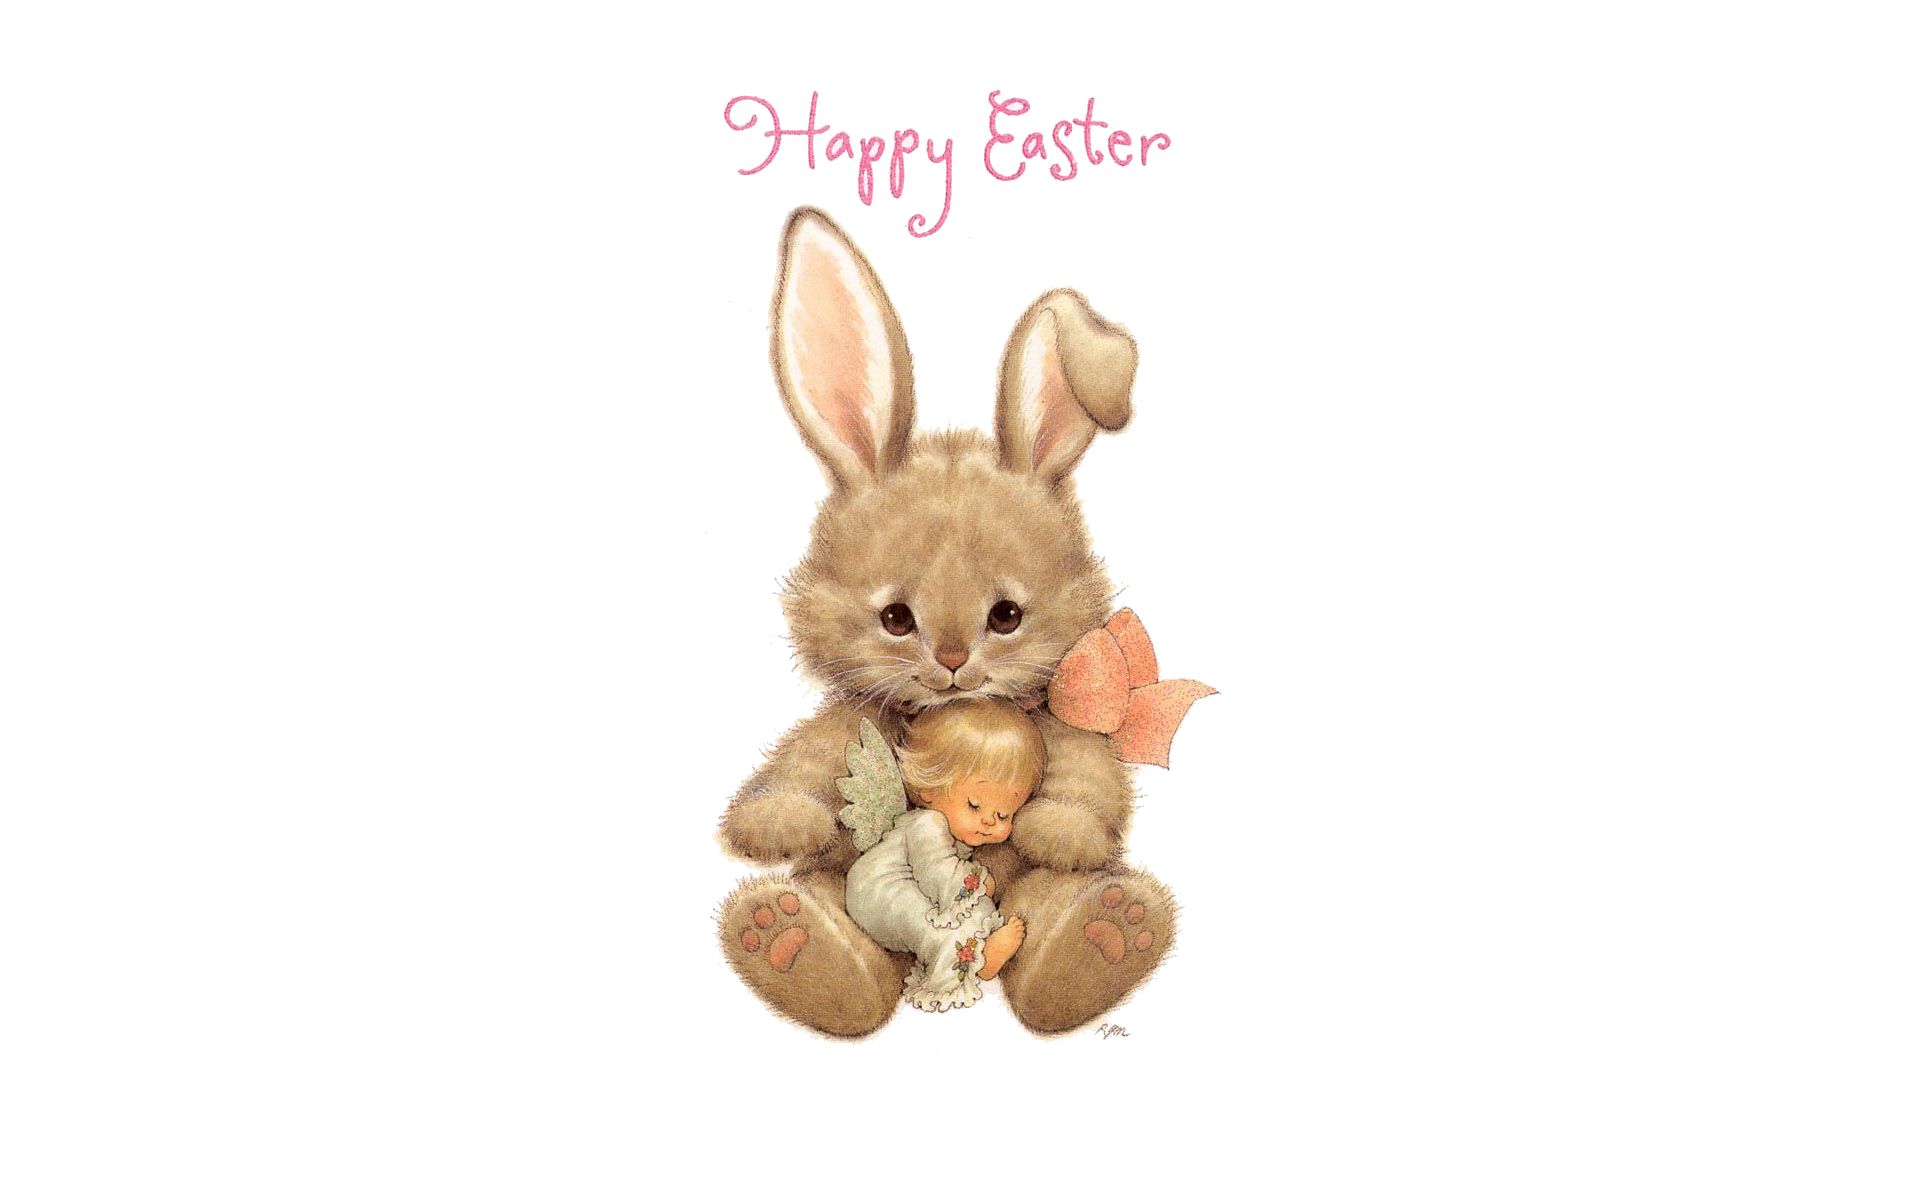 happy easter, easter, holiday, angel, bunny, child, little girl